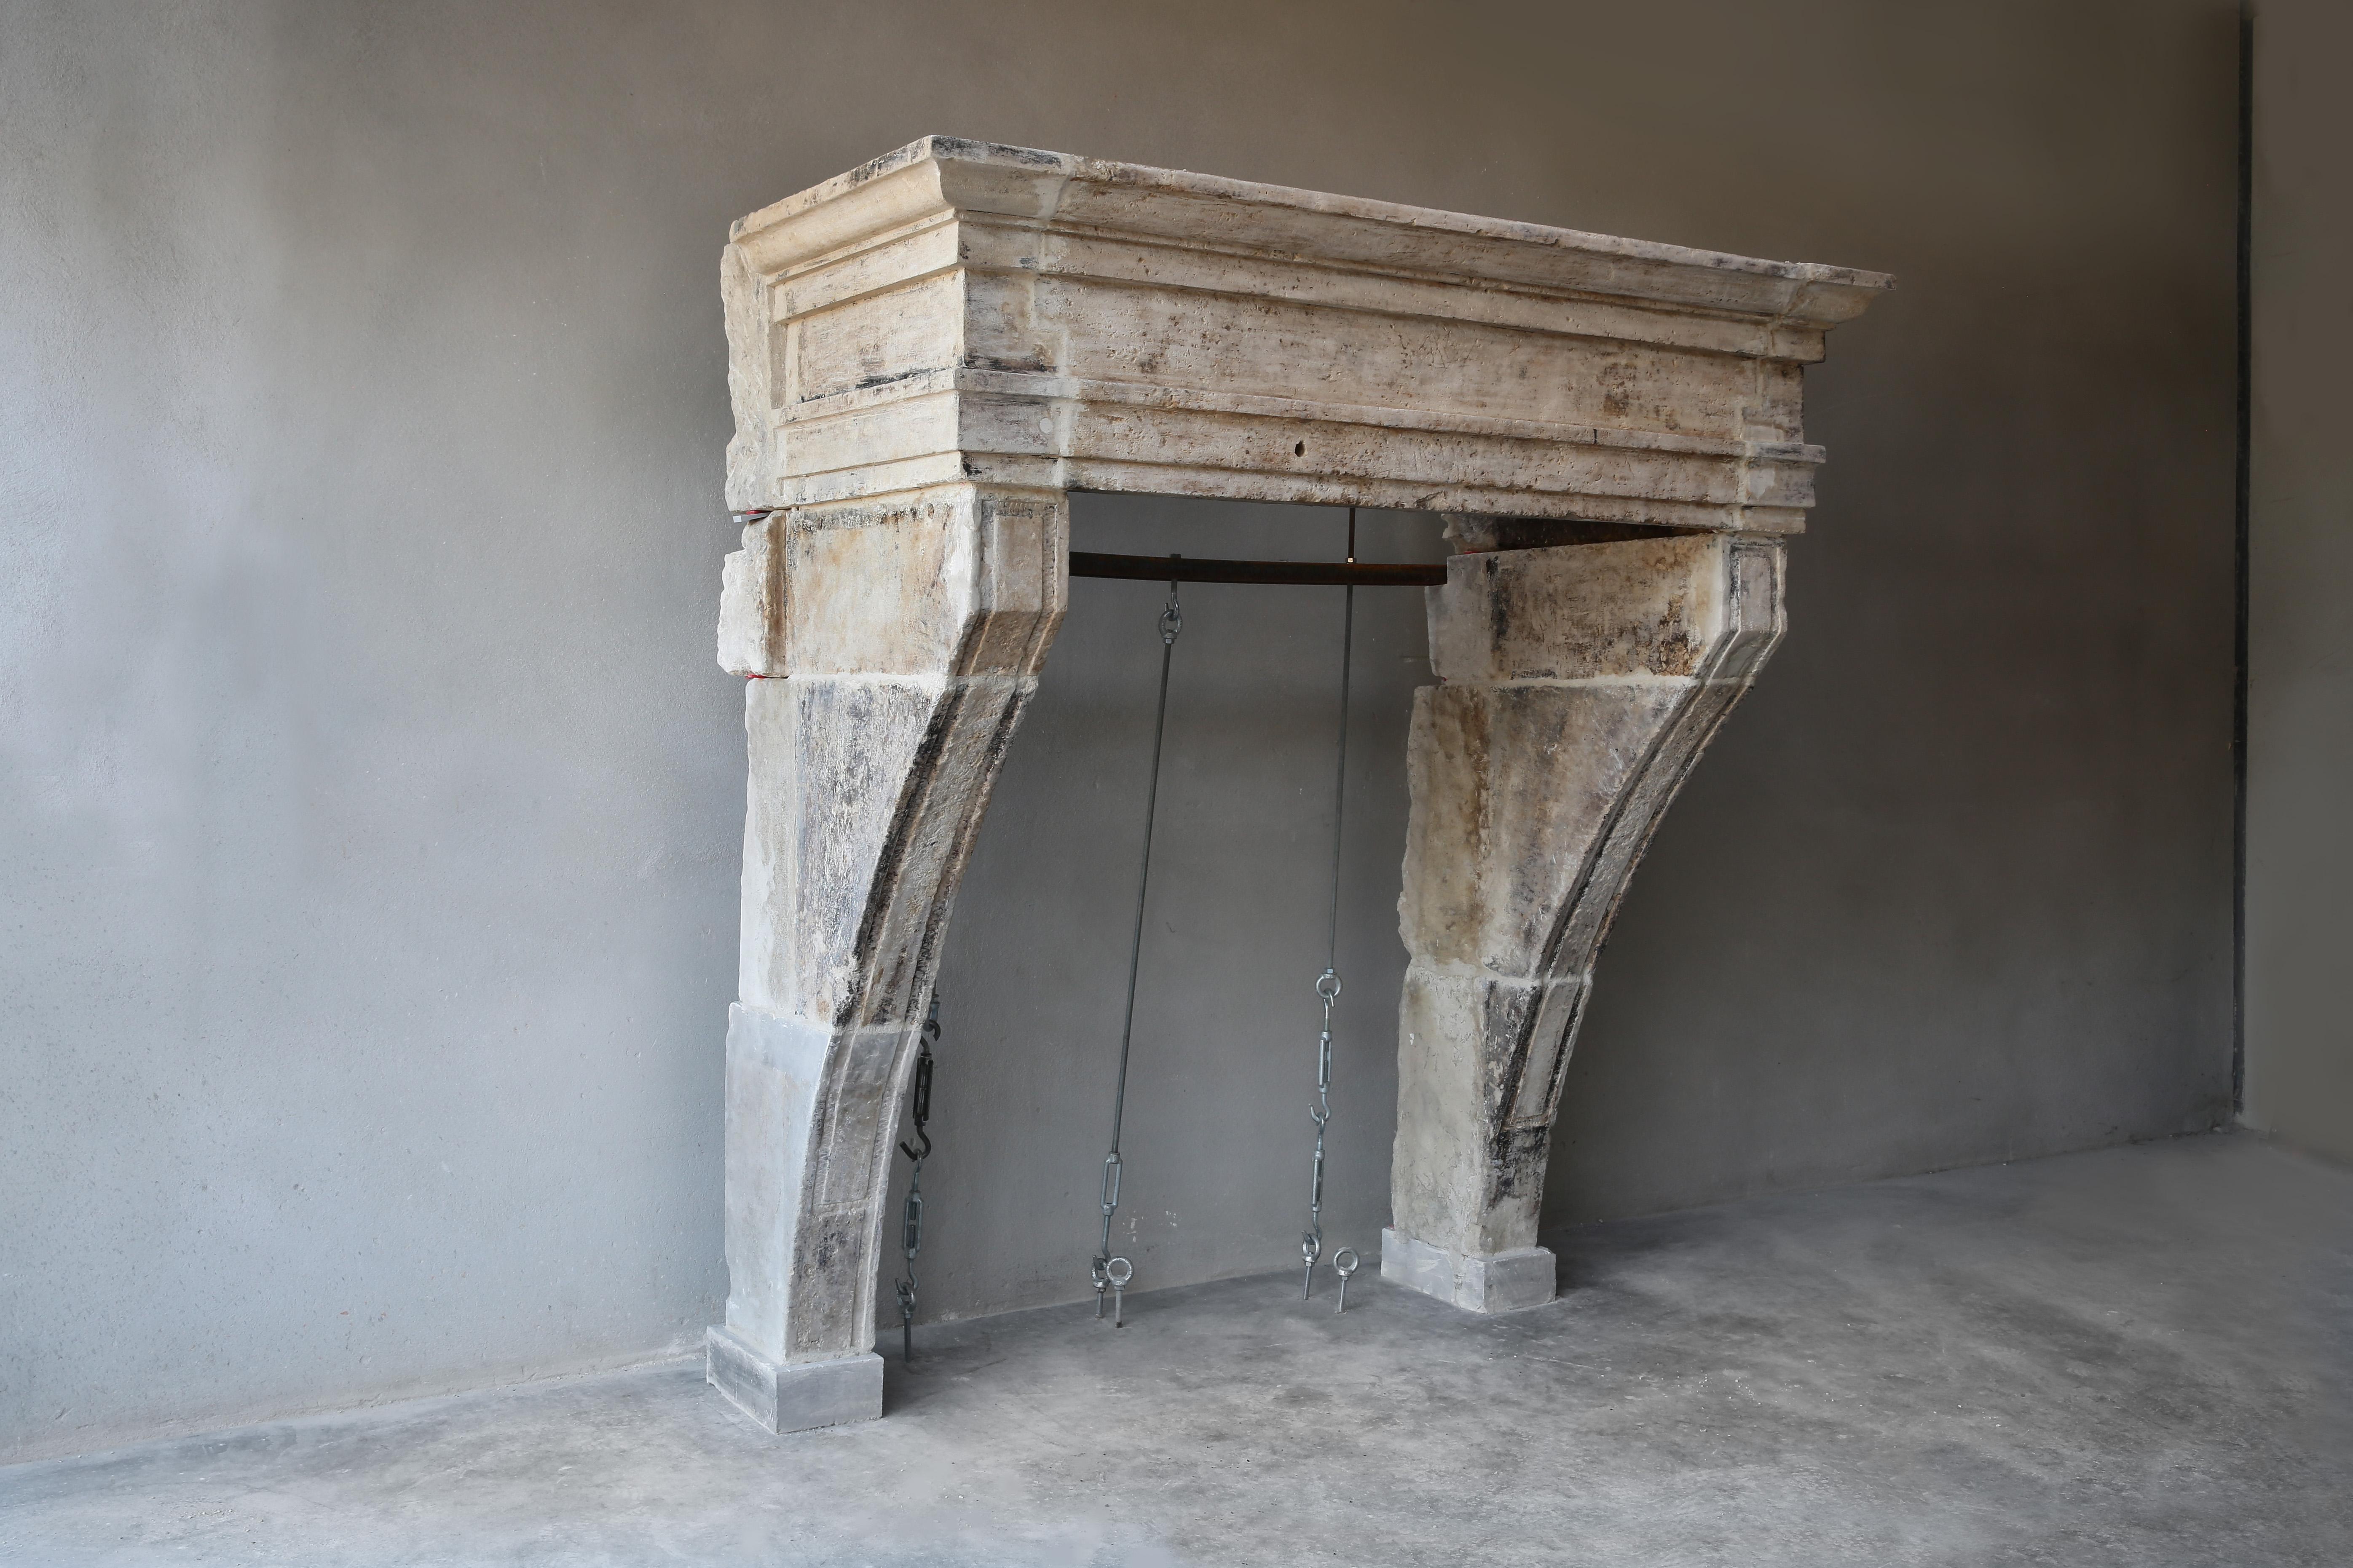 A very robust and beautiful antique fireplace from the 19th century! This French limestone fireplace in Campagnarde style contains beautiful lines and ornaments on the slightly curved legs. The front section is wide, which gives this chimney a lot